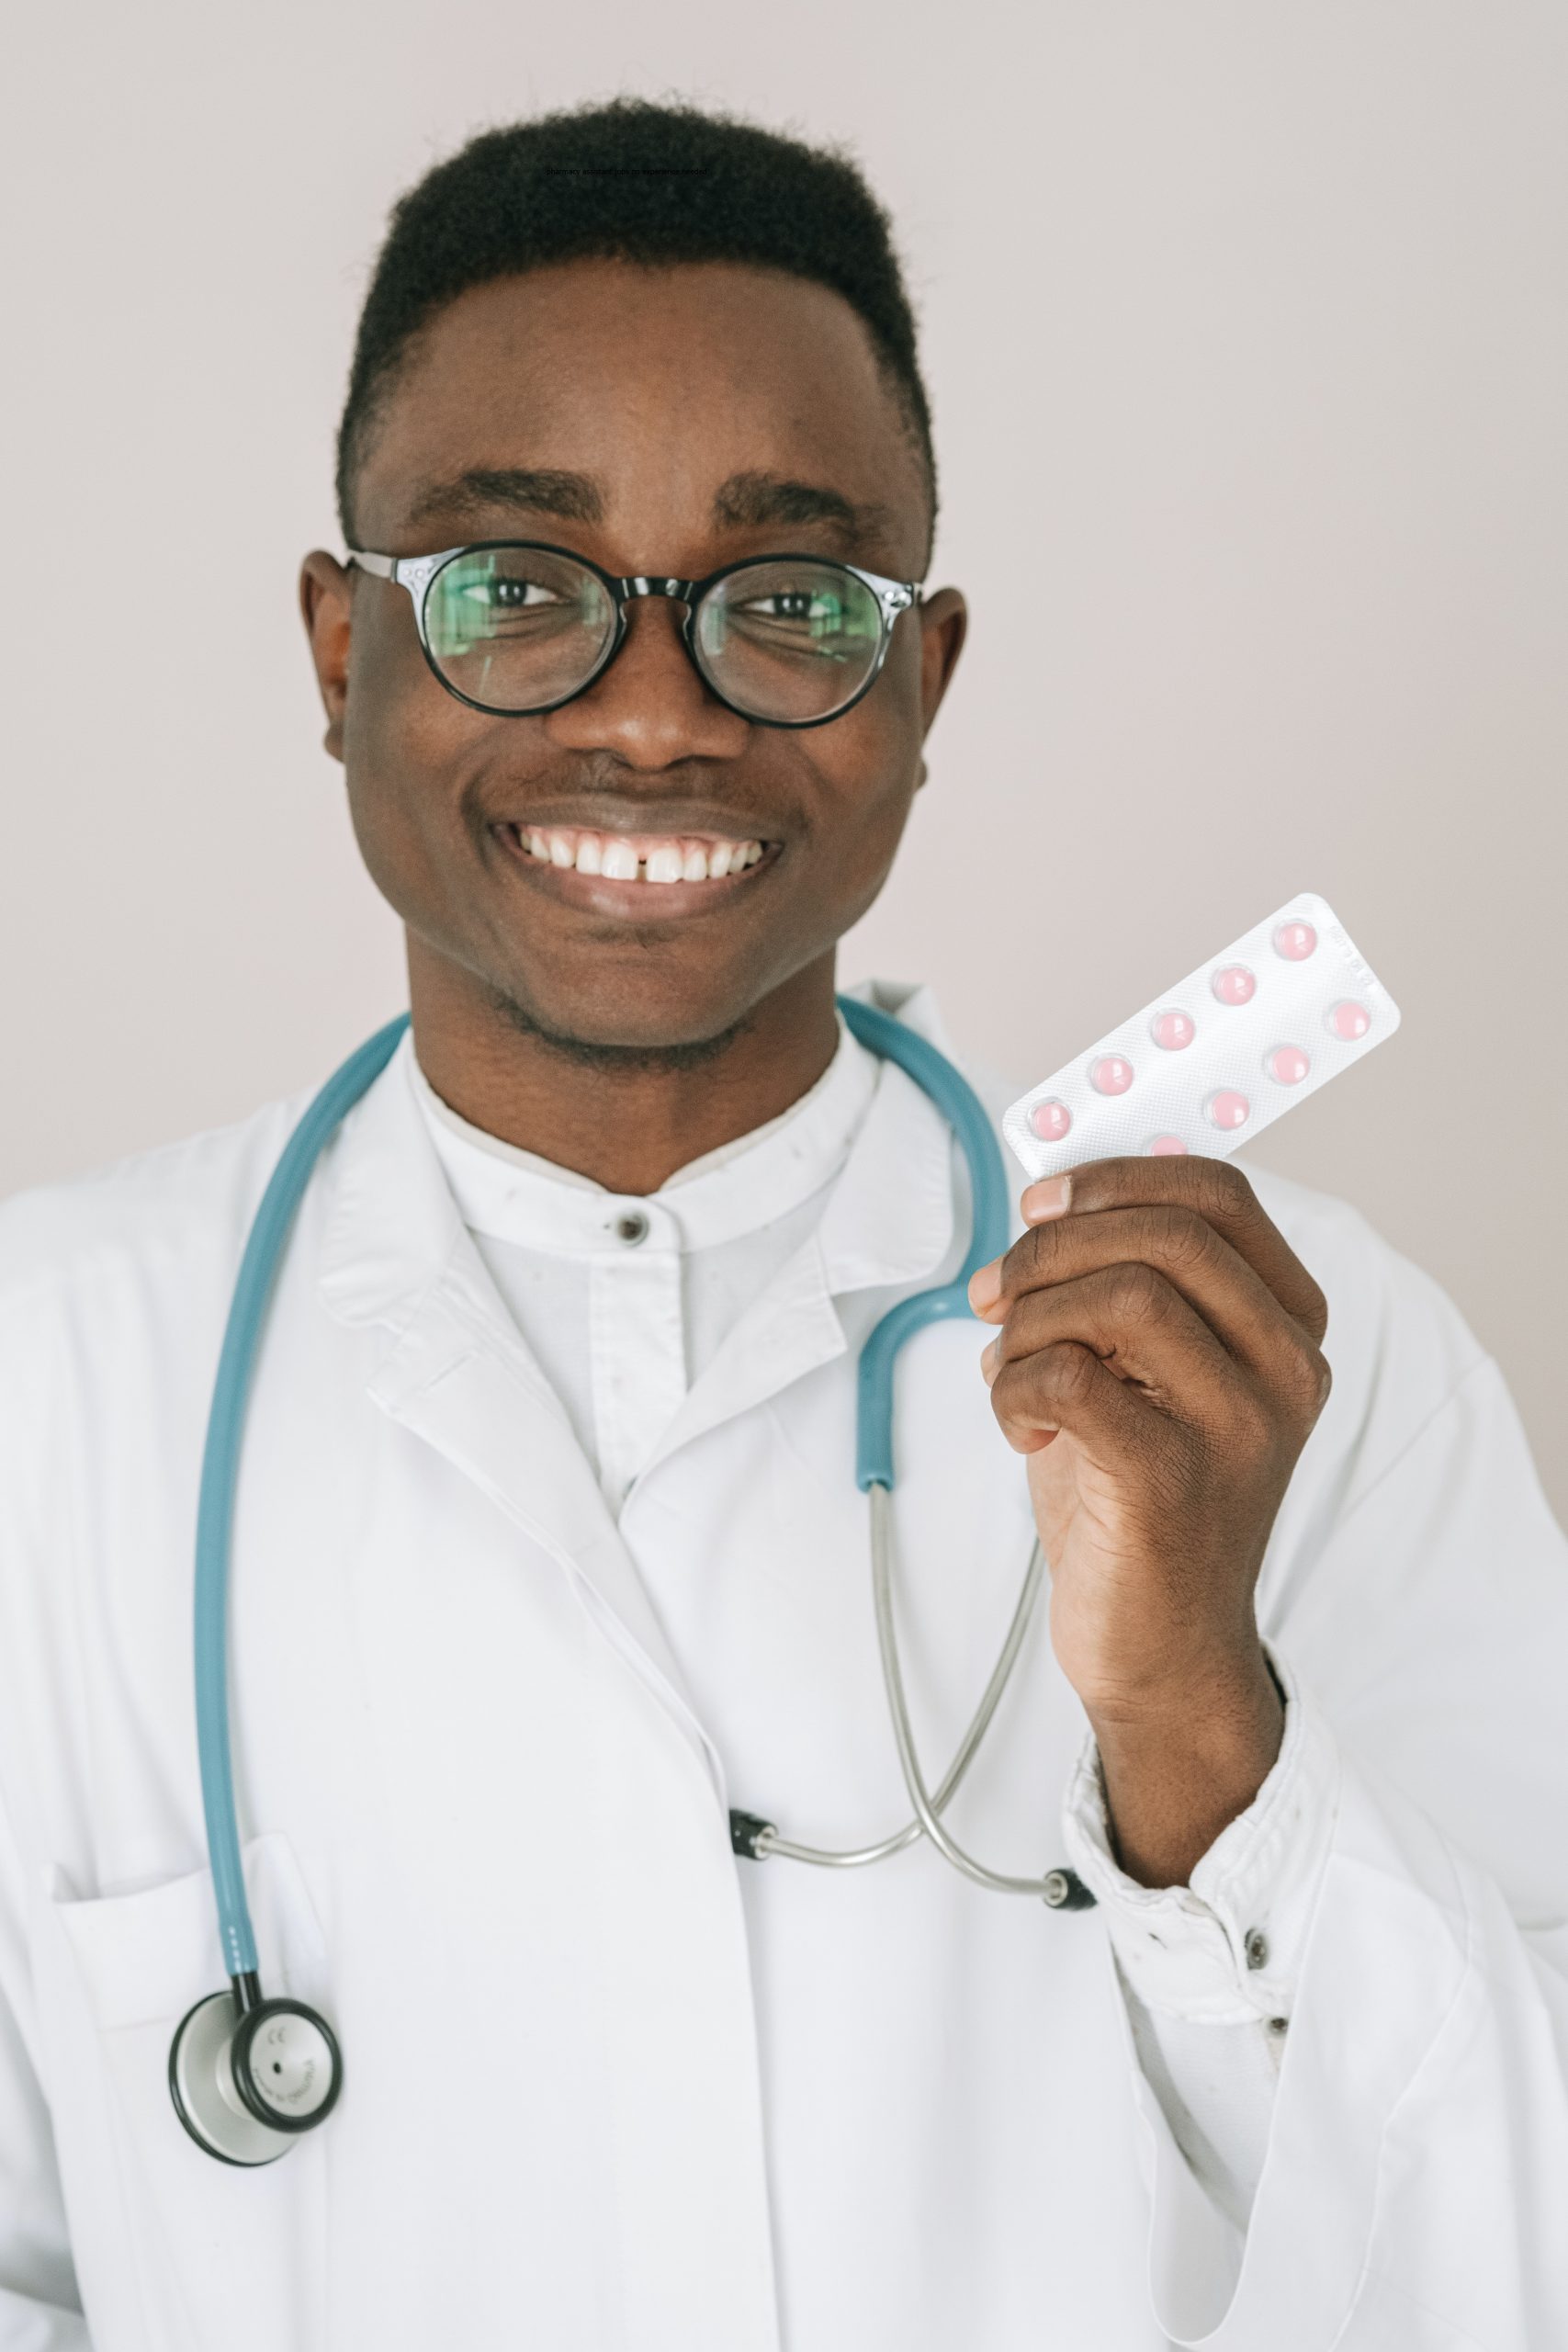 pharmacy assistant jobs no experience needed image